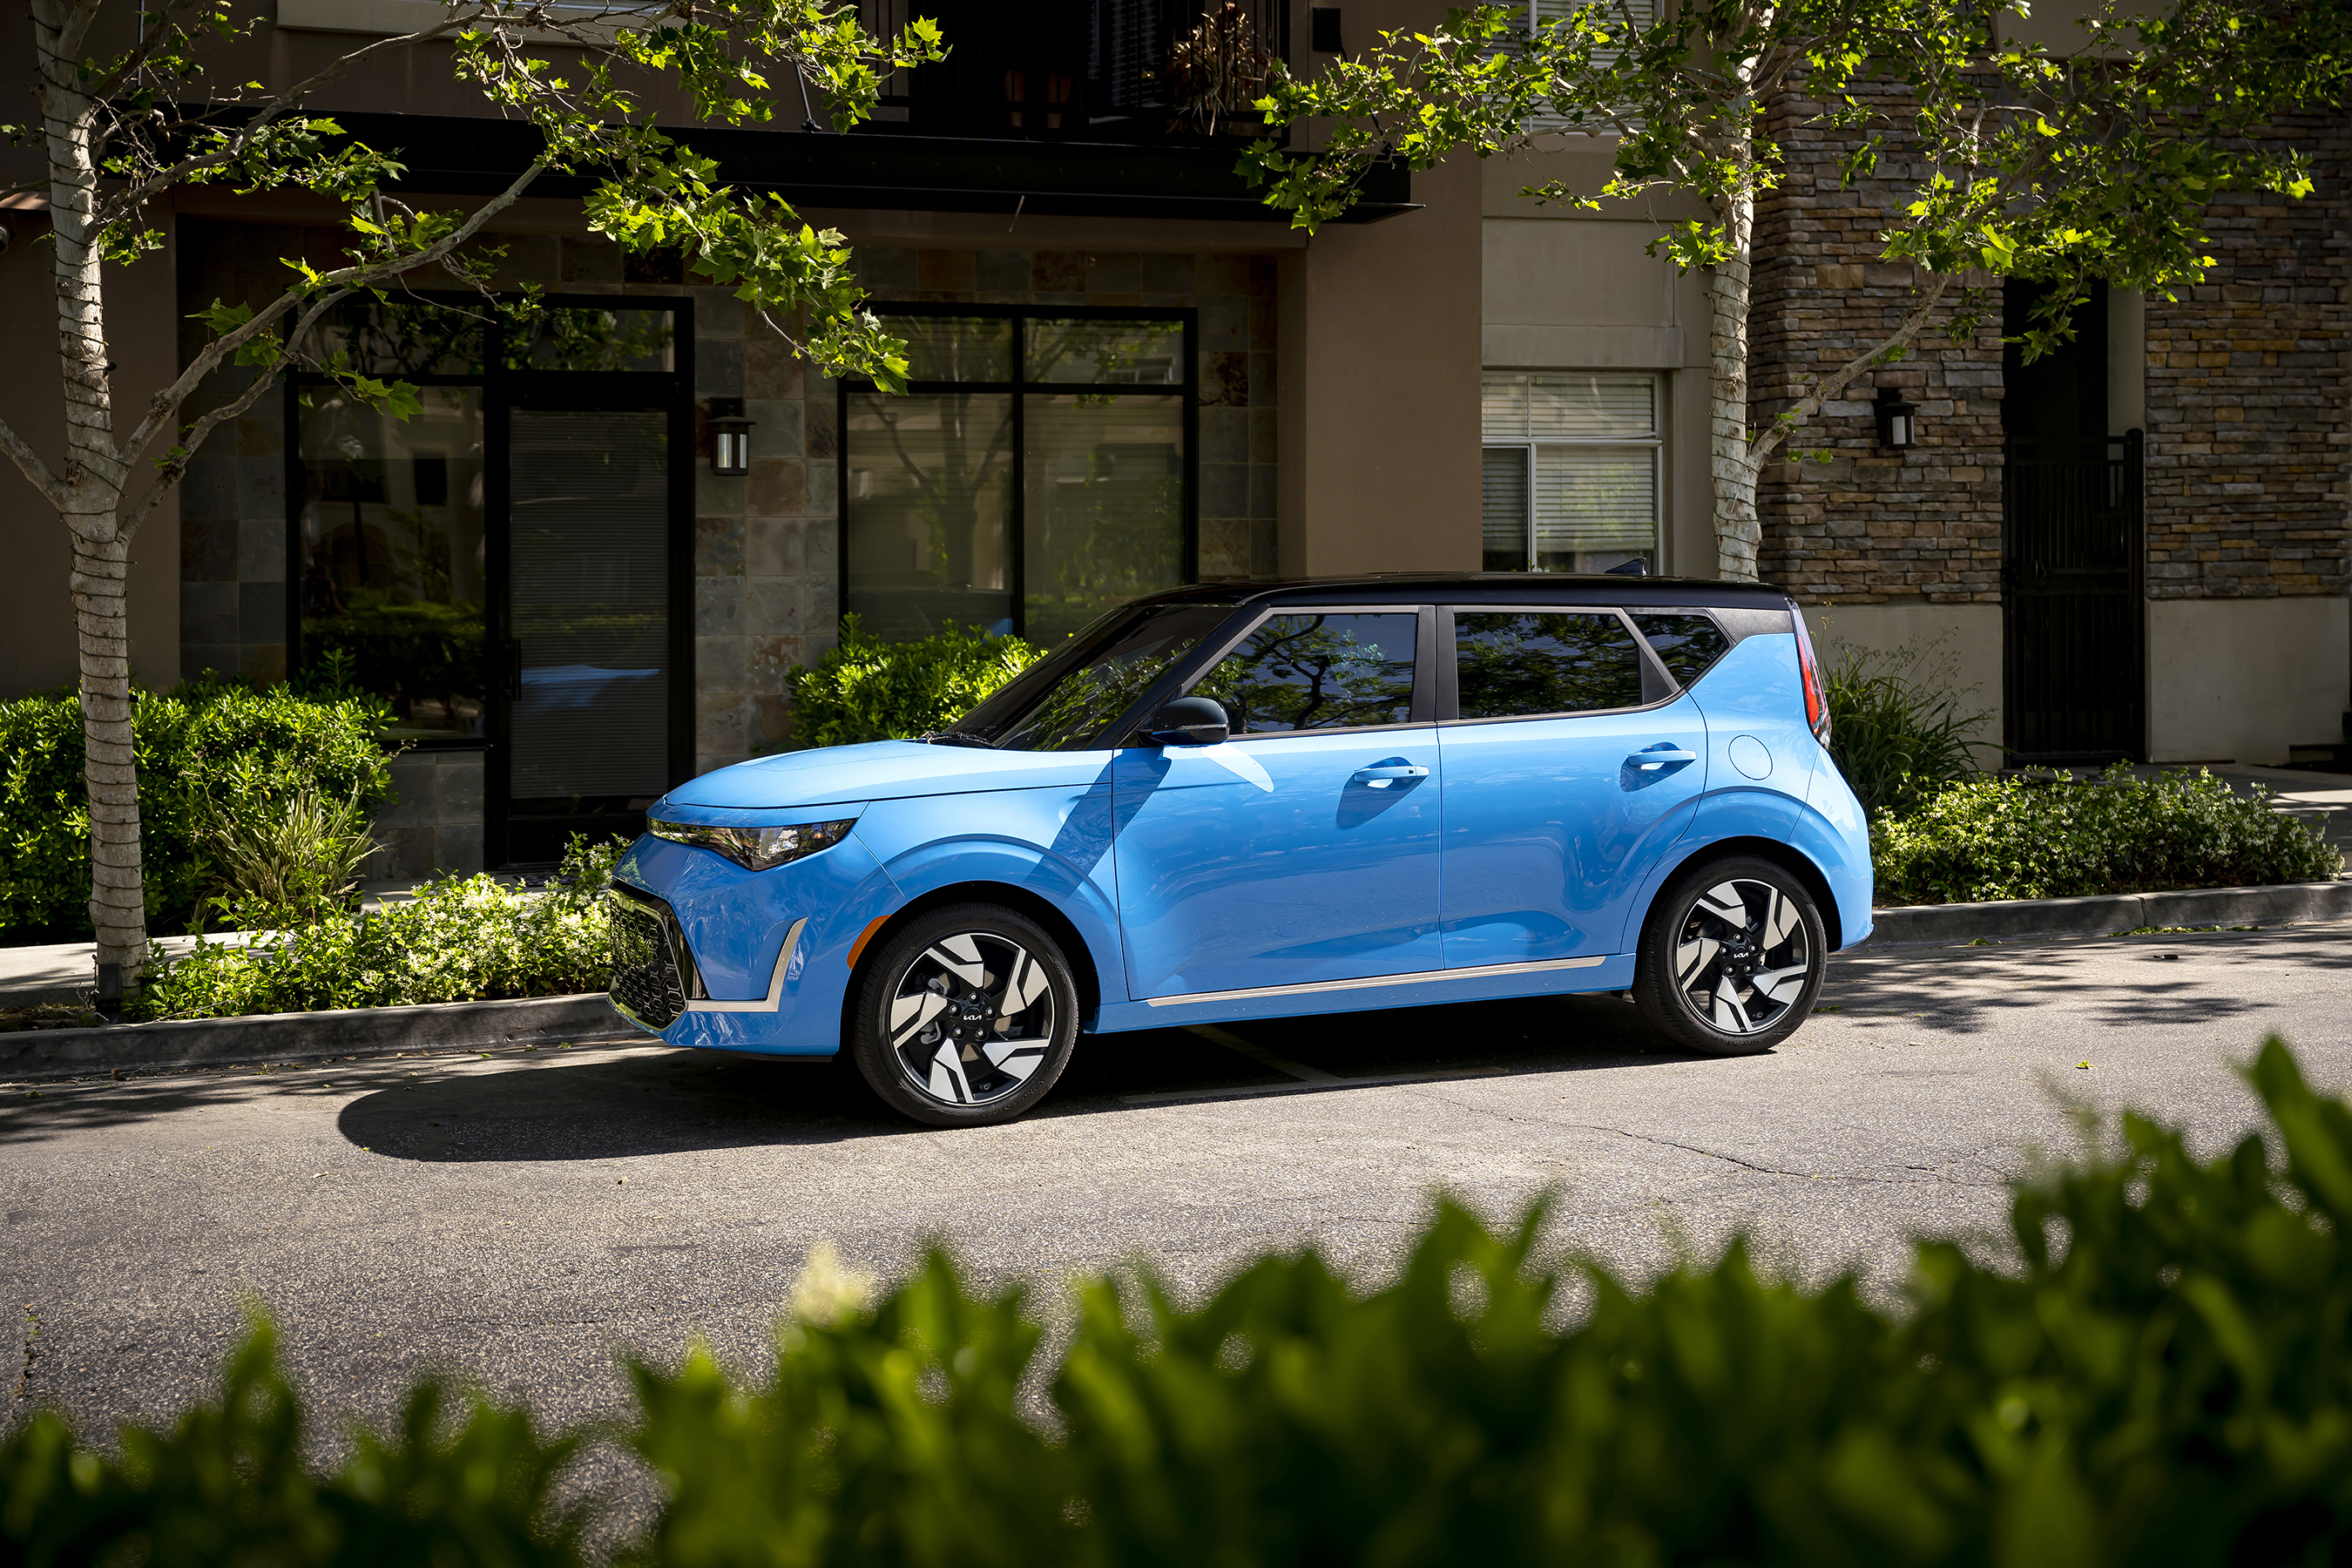 New 2023 Kia Soul debuts with refreshed design inside and out, advanced technology and feature-packed trims.